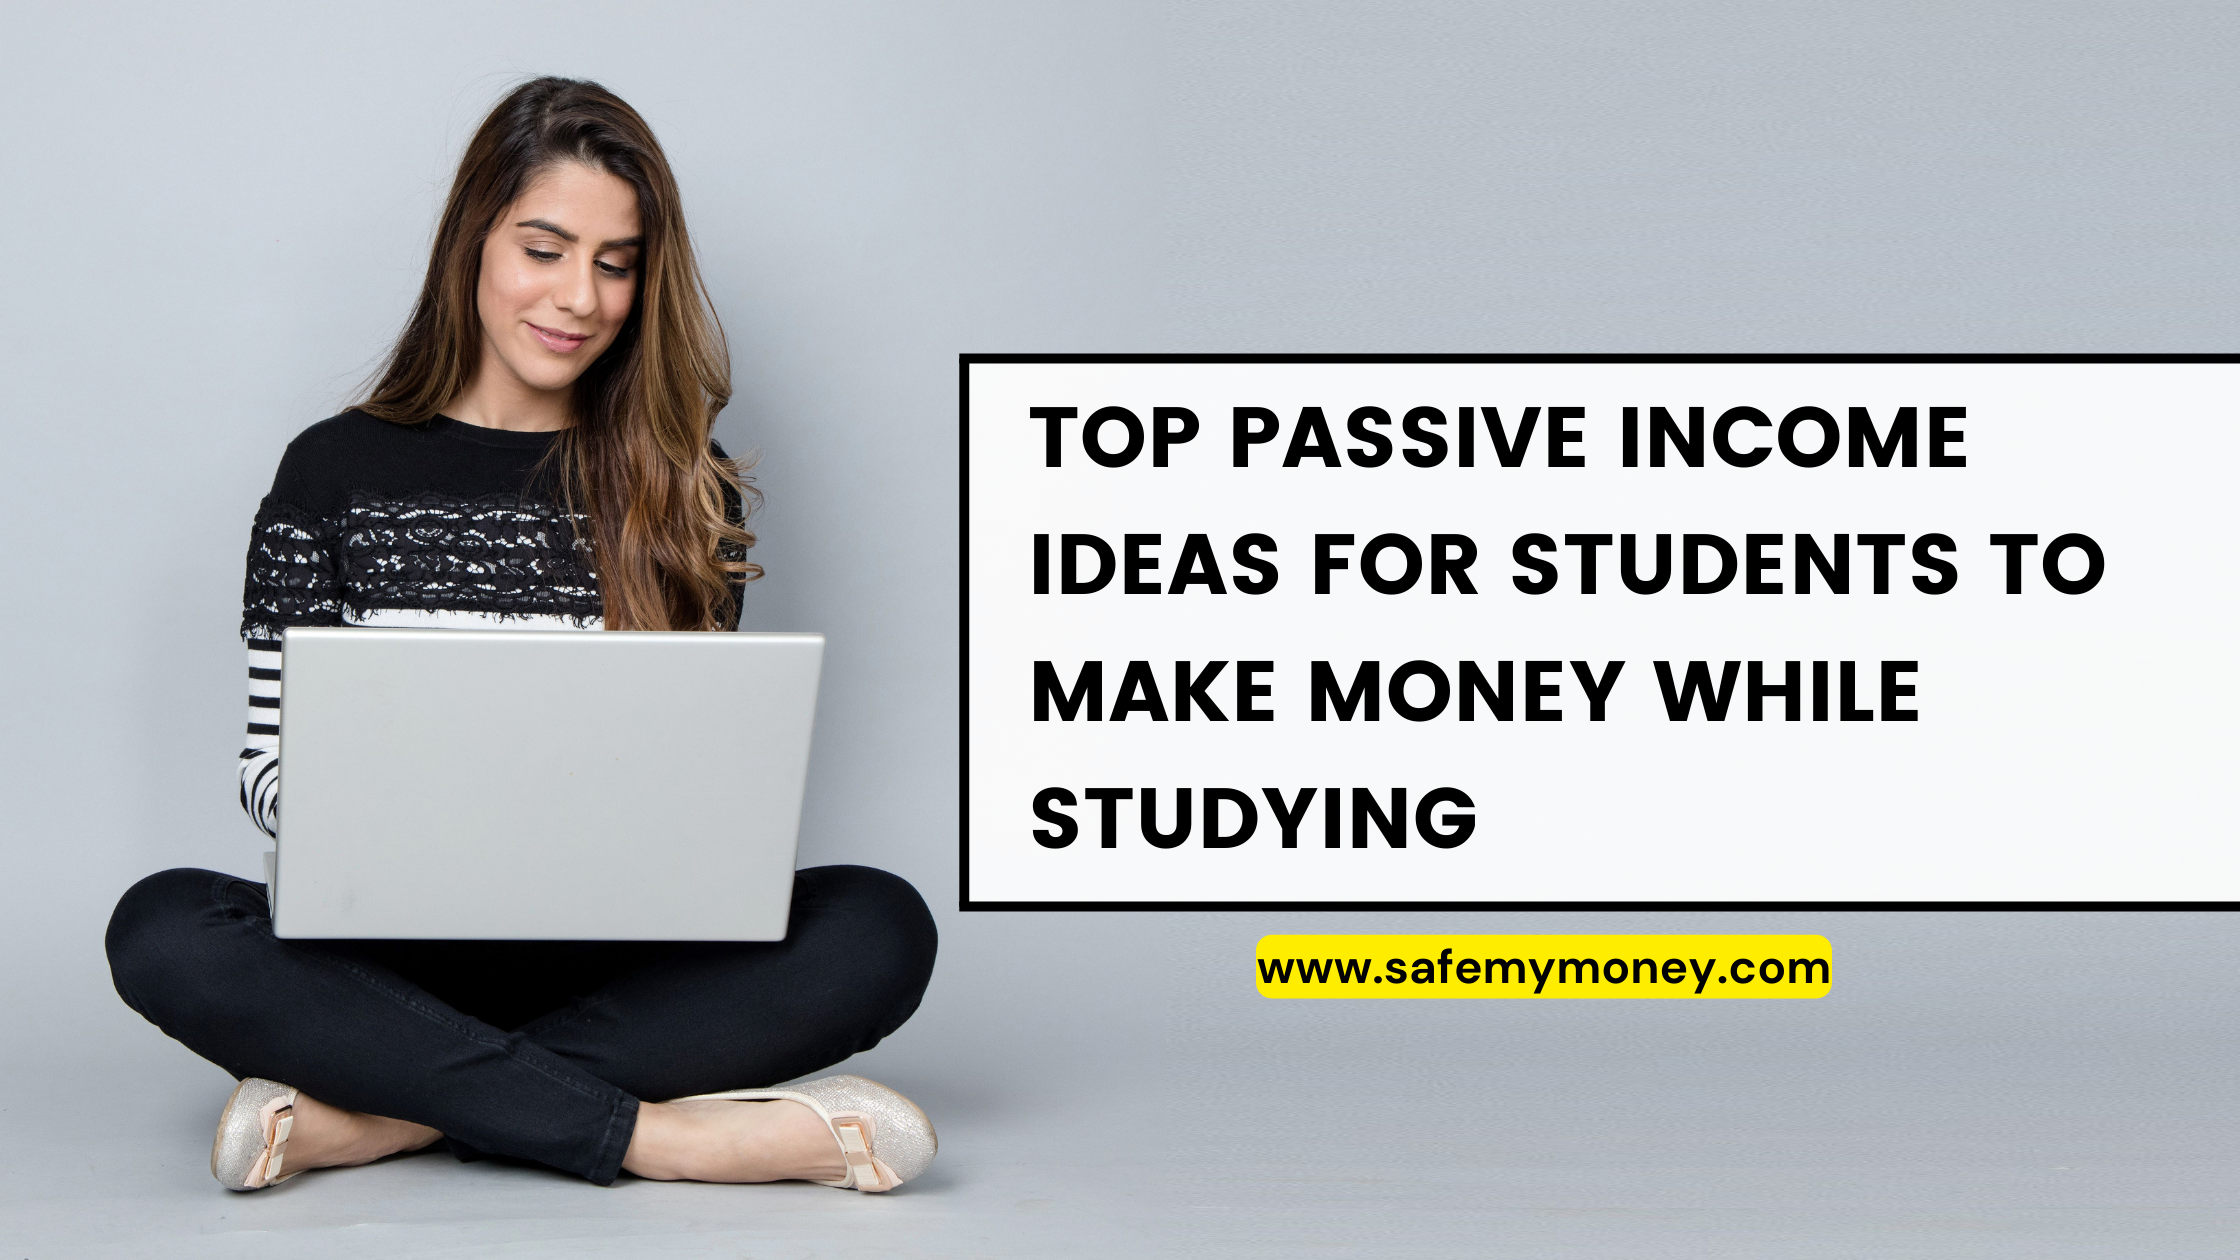 Top Passive Income Ideas for Students to Make Money While Studying